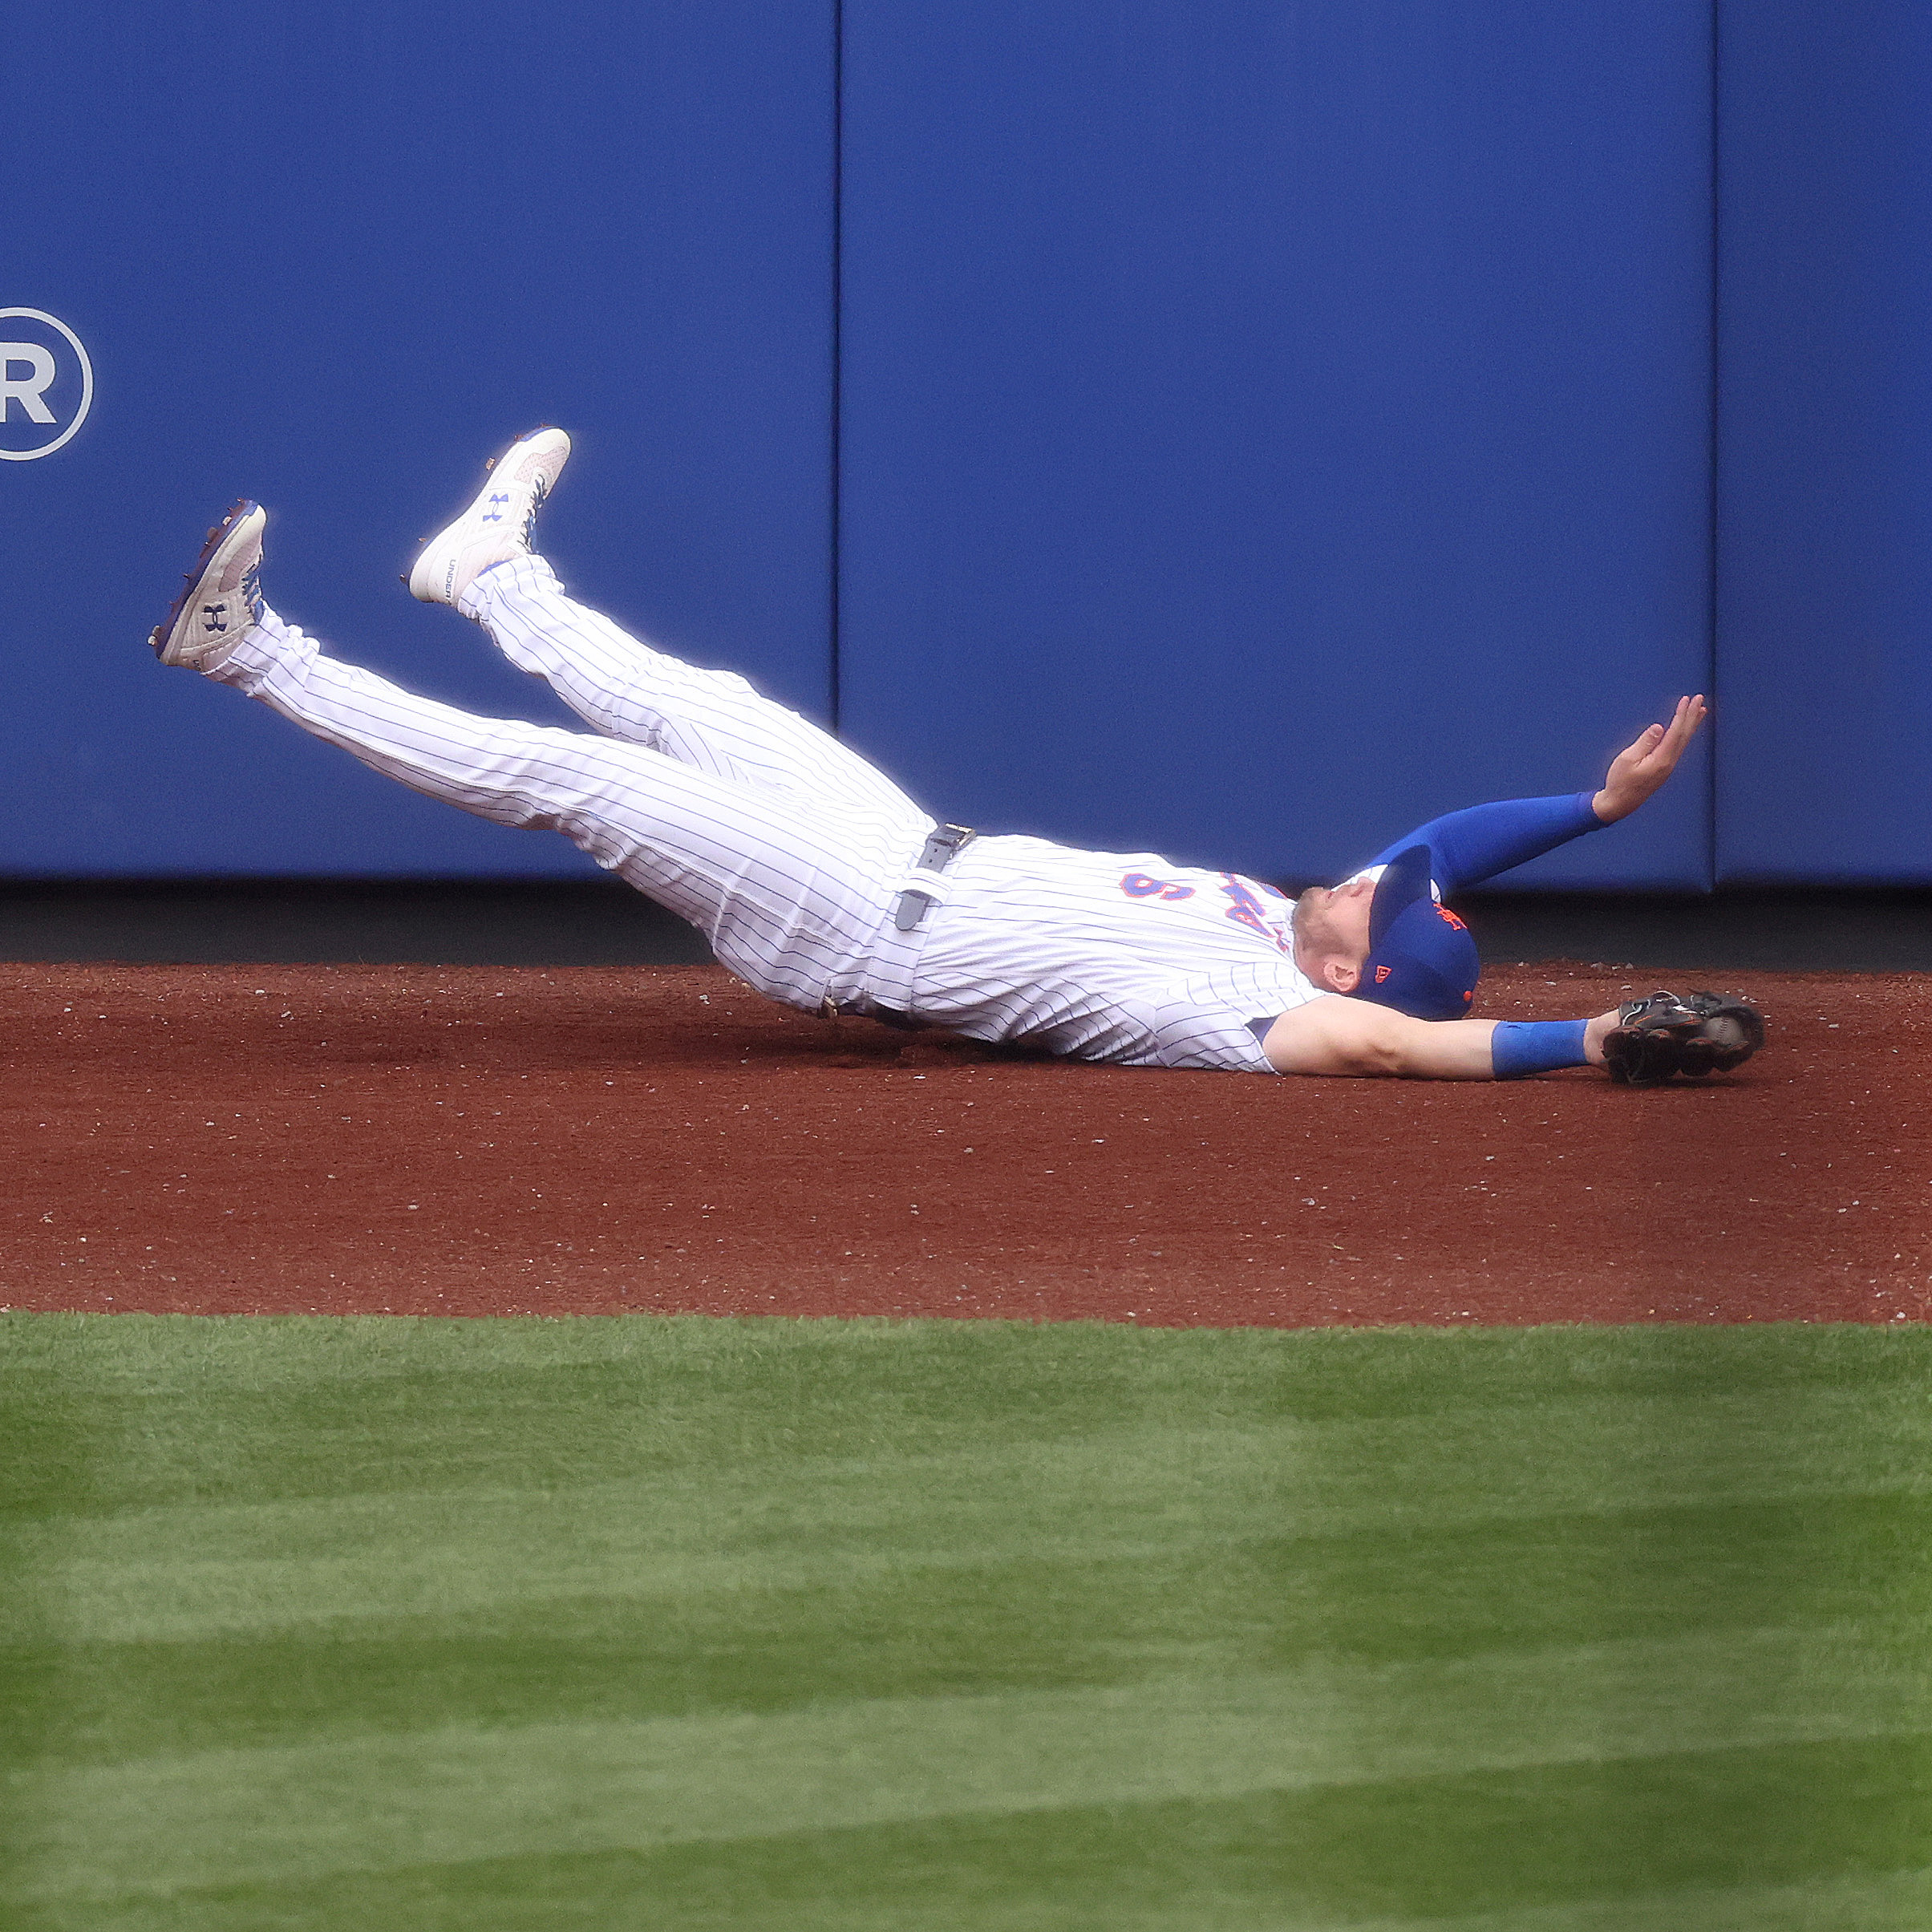 Jeff McNeil's AMAZING Catch at the Wall!, New York Mets